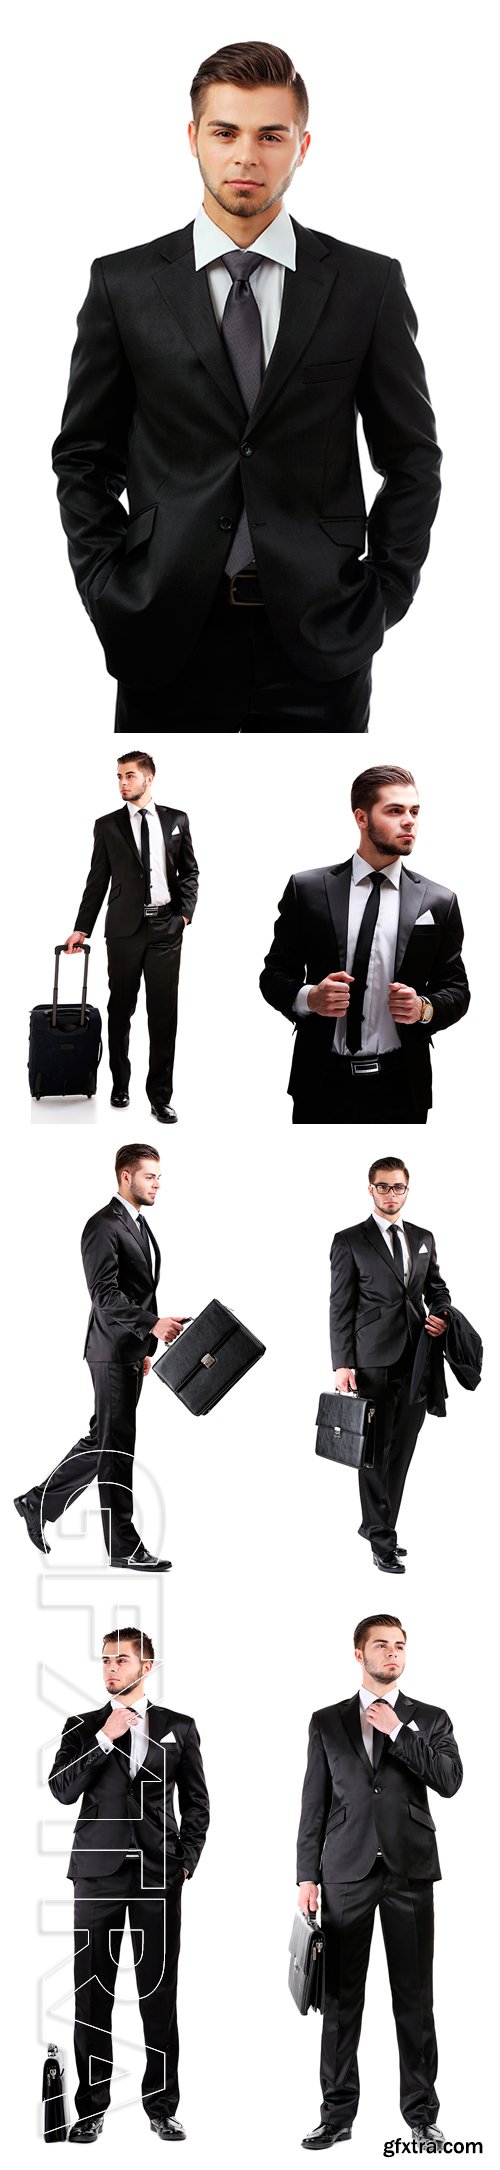 Stock Photos - Elegant man in suit with briefcase isolated on white